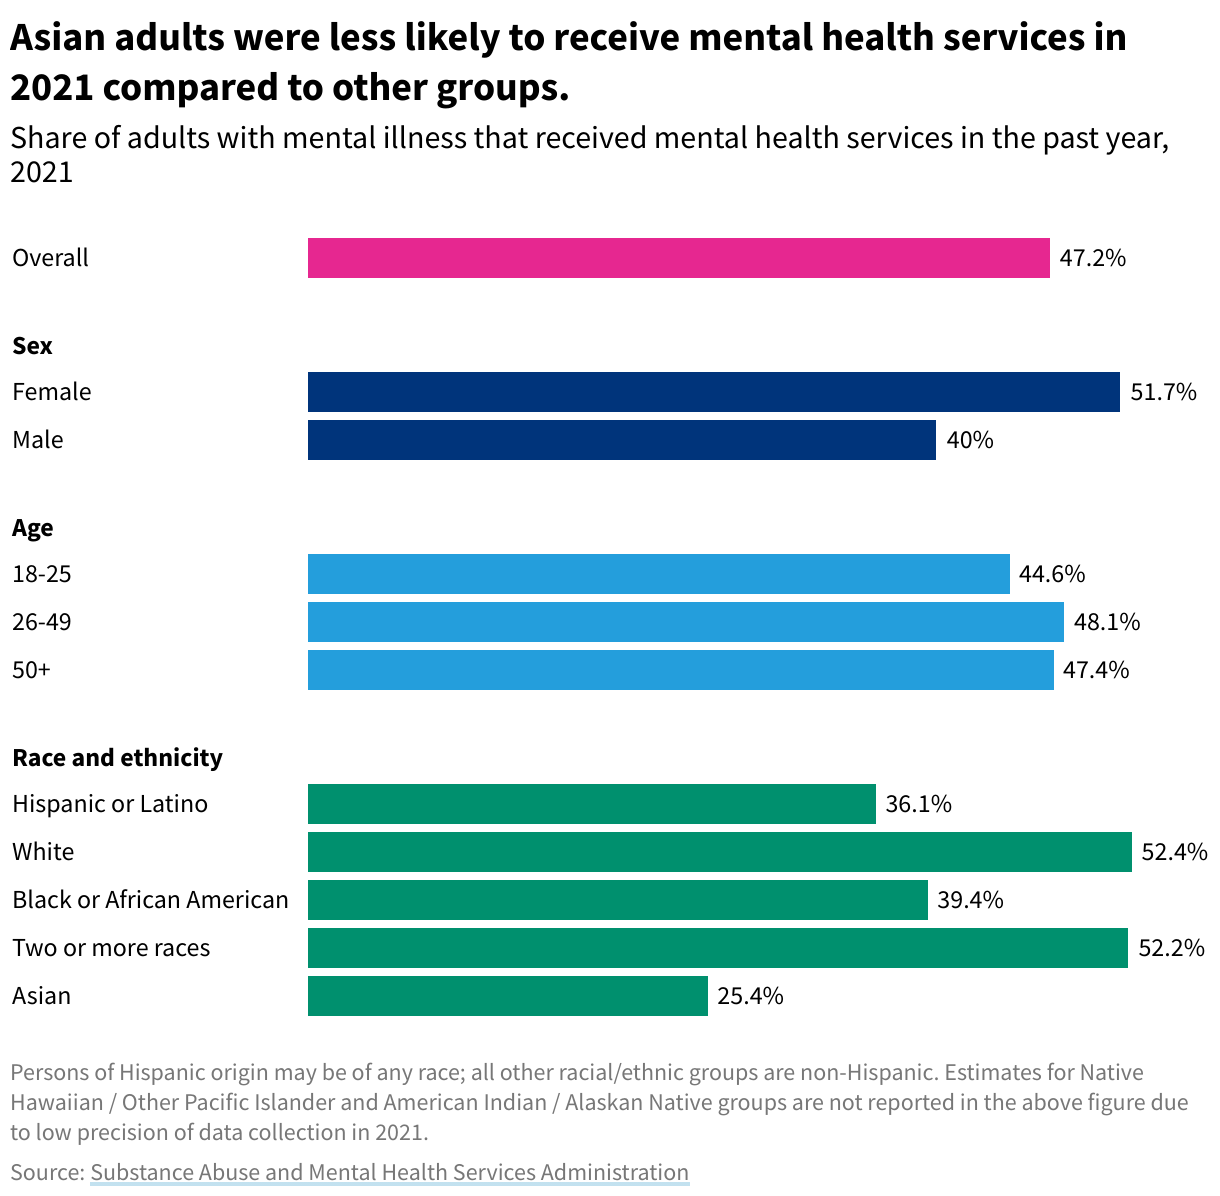 Bar chart showing the share of adults with mental illness that received mental health services in 2021.